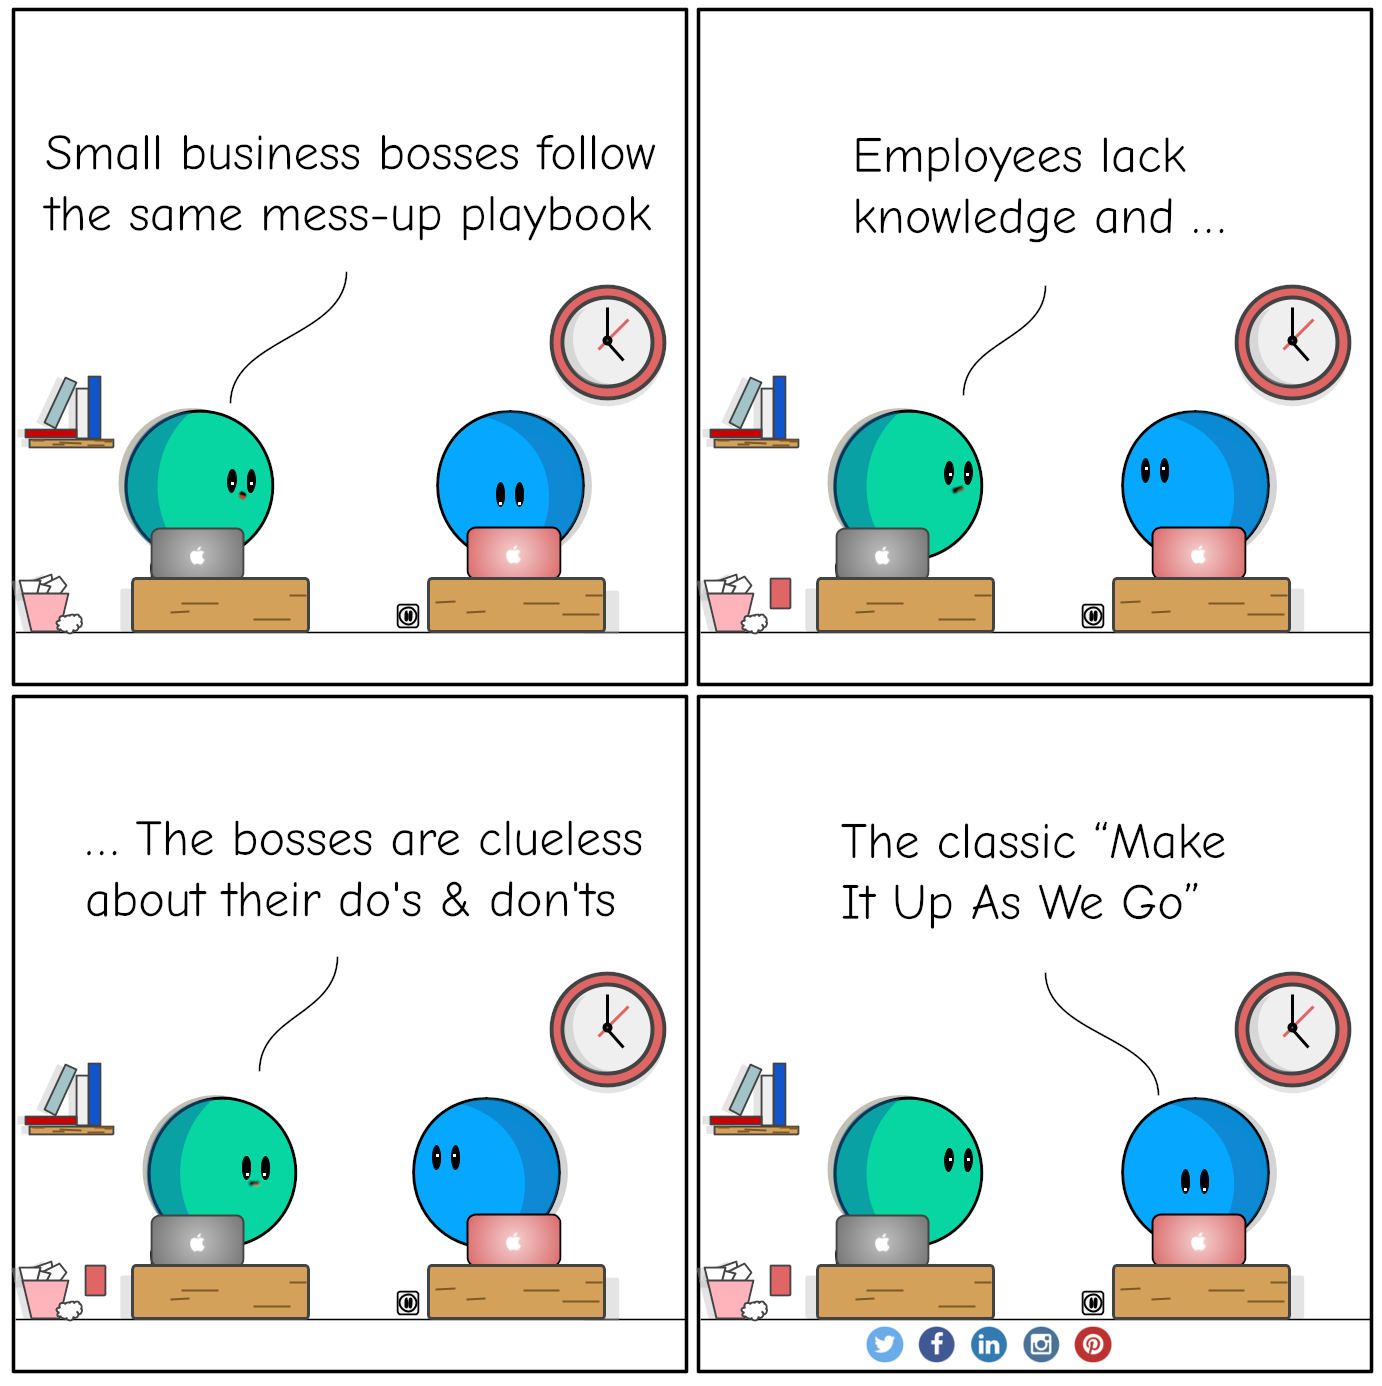 Conversation between A and B about small business leaders. 
				A: Small business bosses follow the same mess-up playbook.
				B: Employees lack knowledge, and Bosses are clueless about their do's and don'ts.
				The Classic Make It Up As We Go.
				By flinkliv.com

            